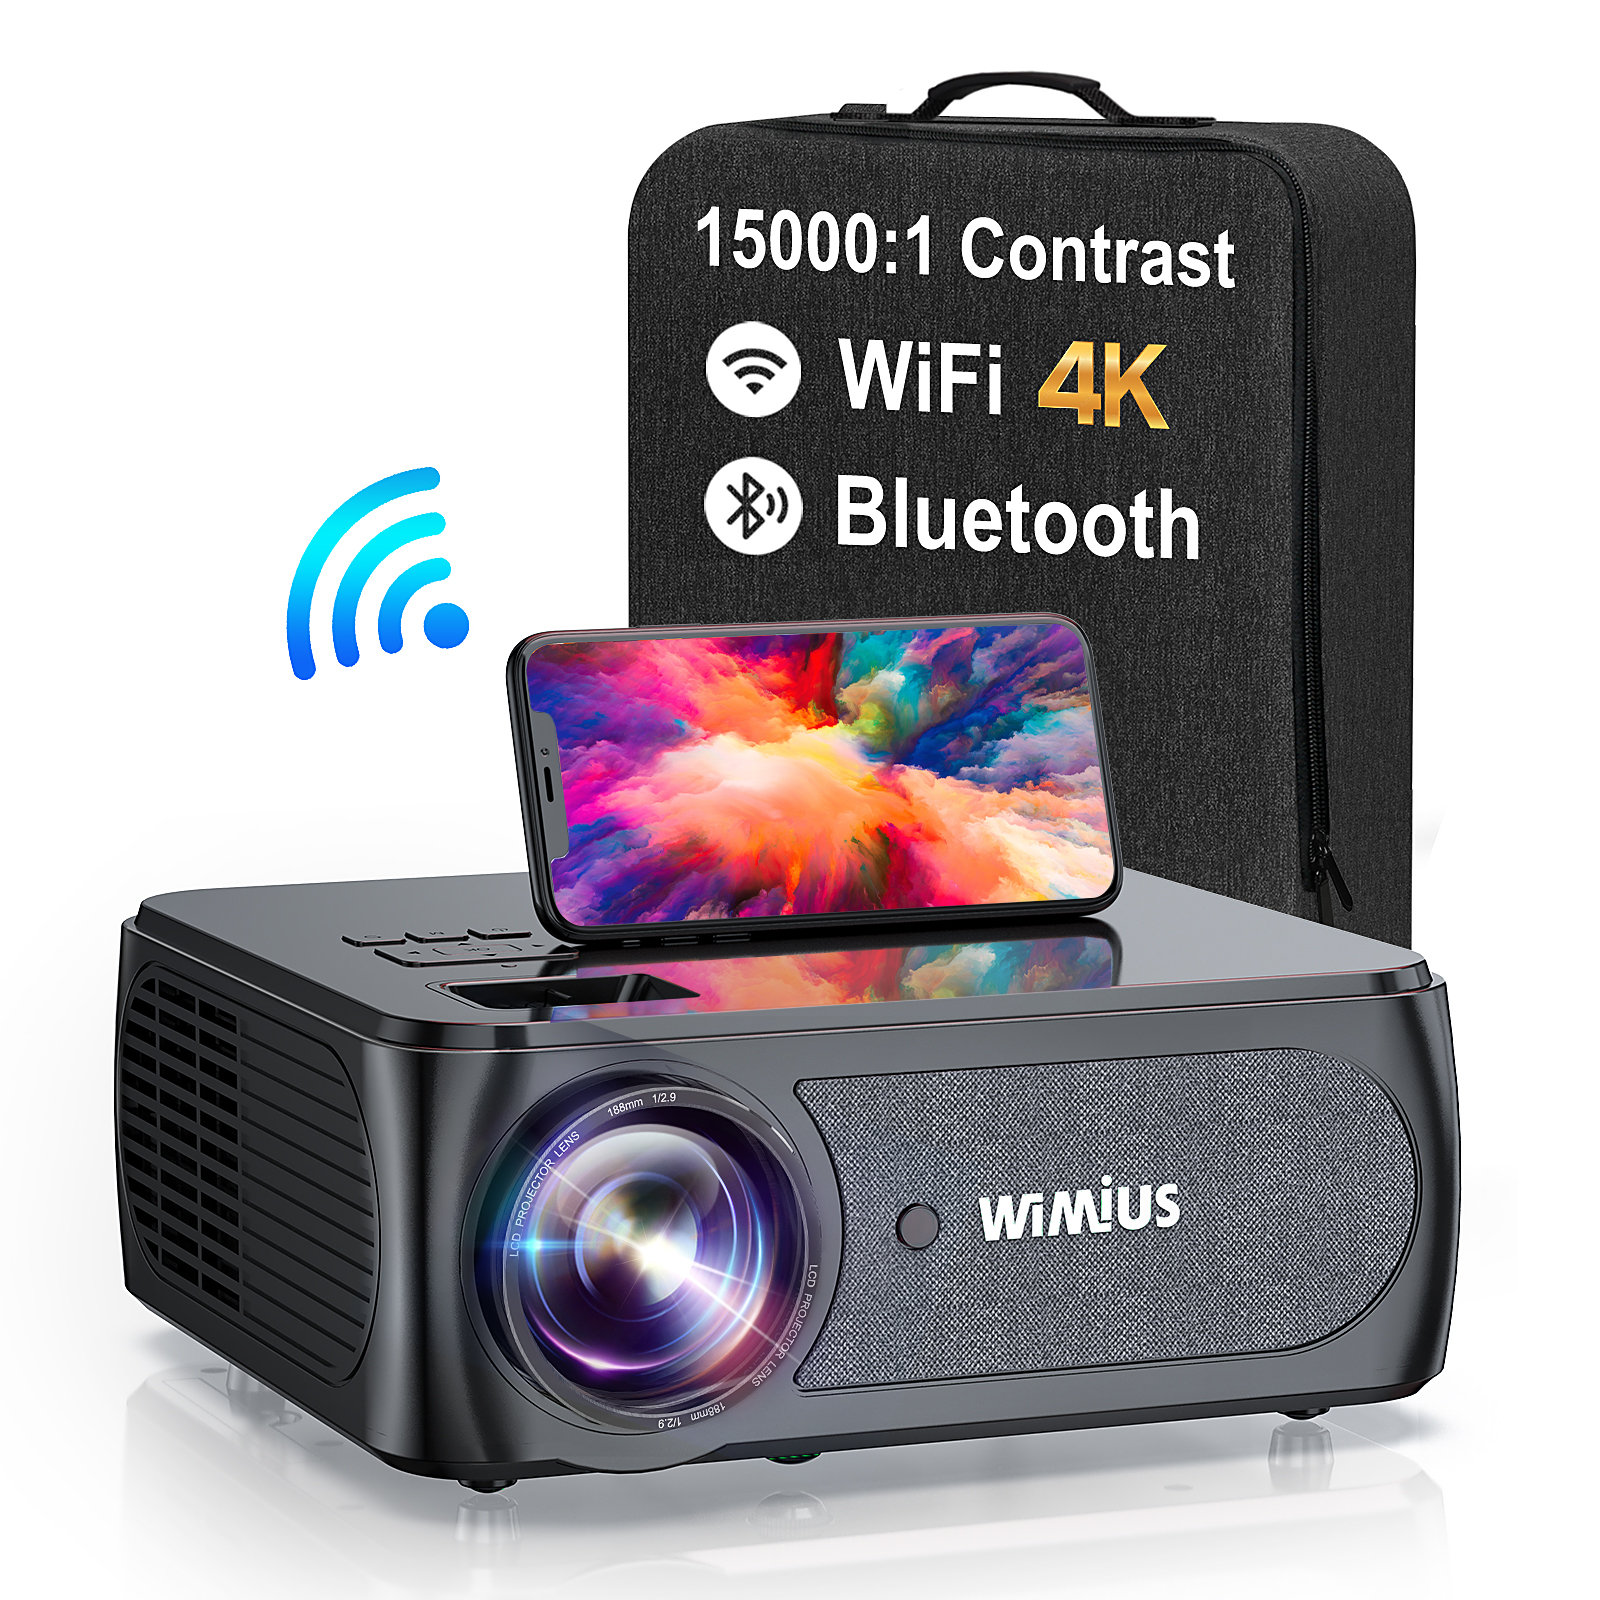 [Electric Focus] Wimius Portable Projector, 5G WiFi Bluetooth Projector,  1080P Support, Smart Home Movie Projector, Christmas Gifts for Family, Kids